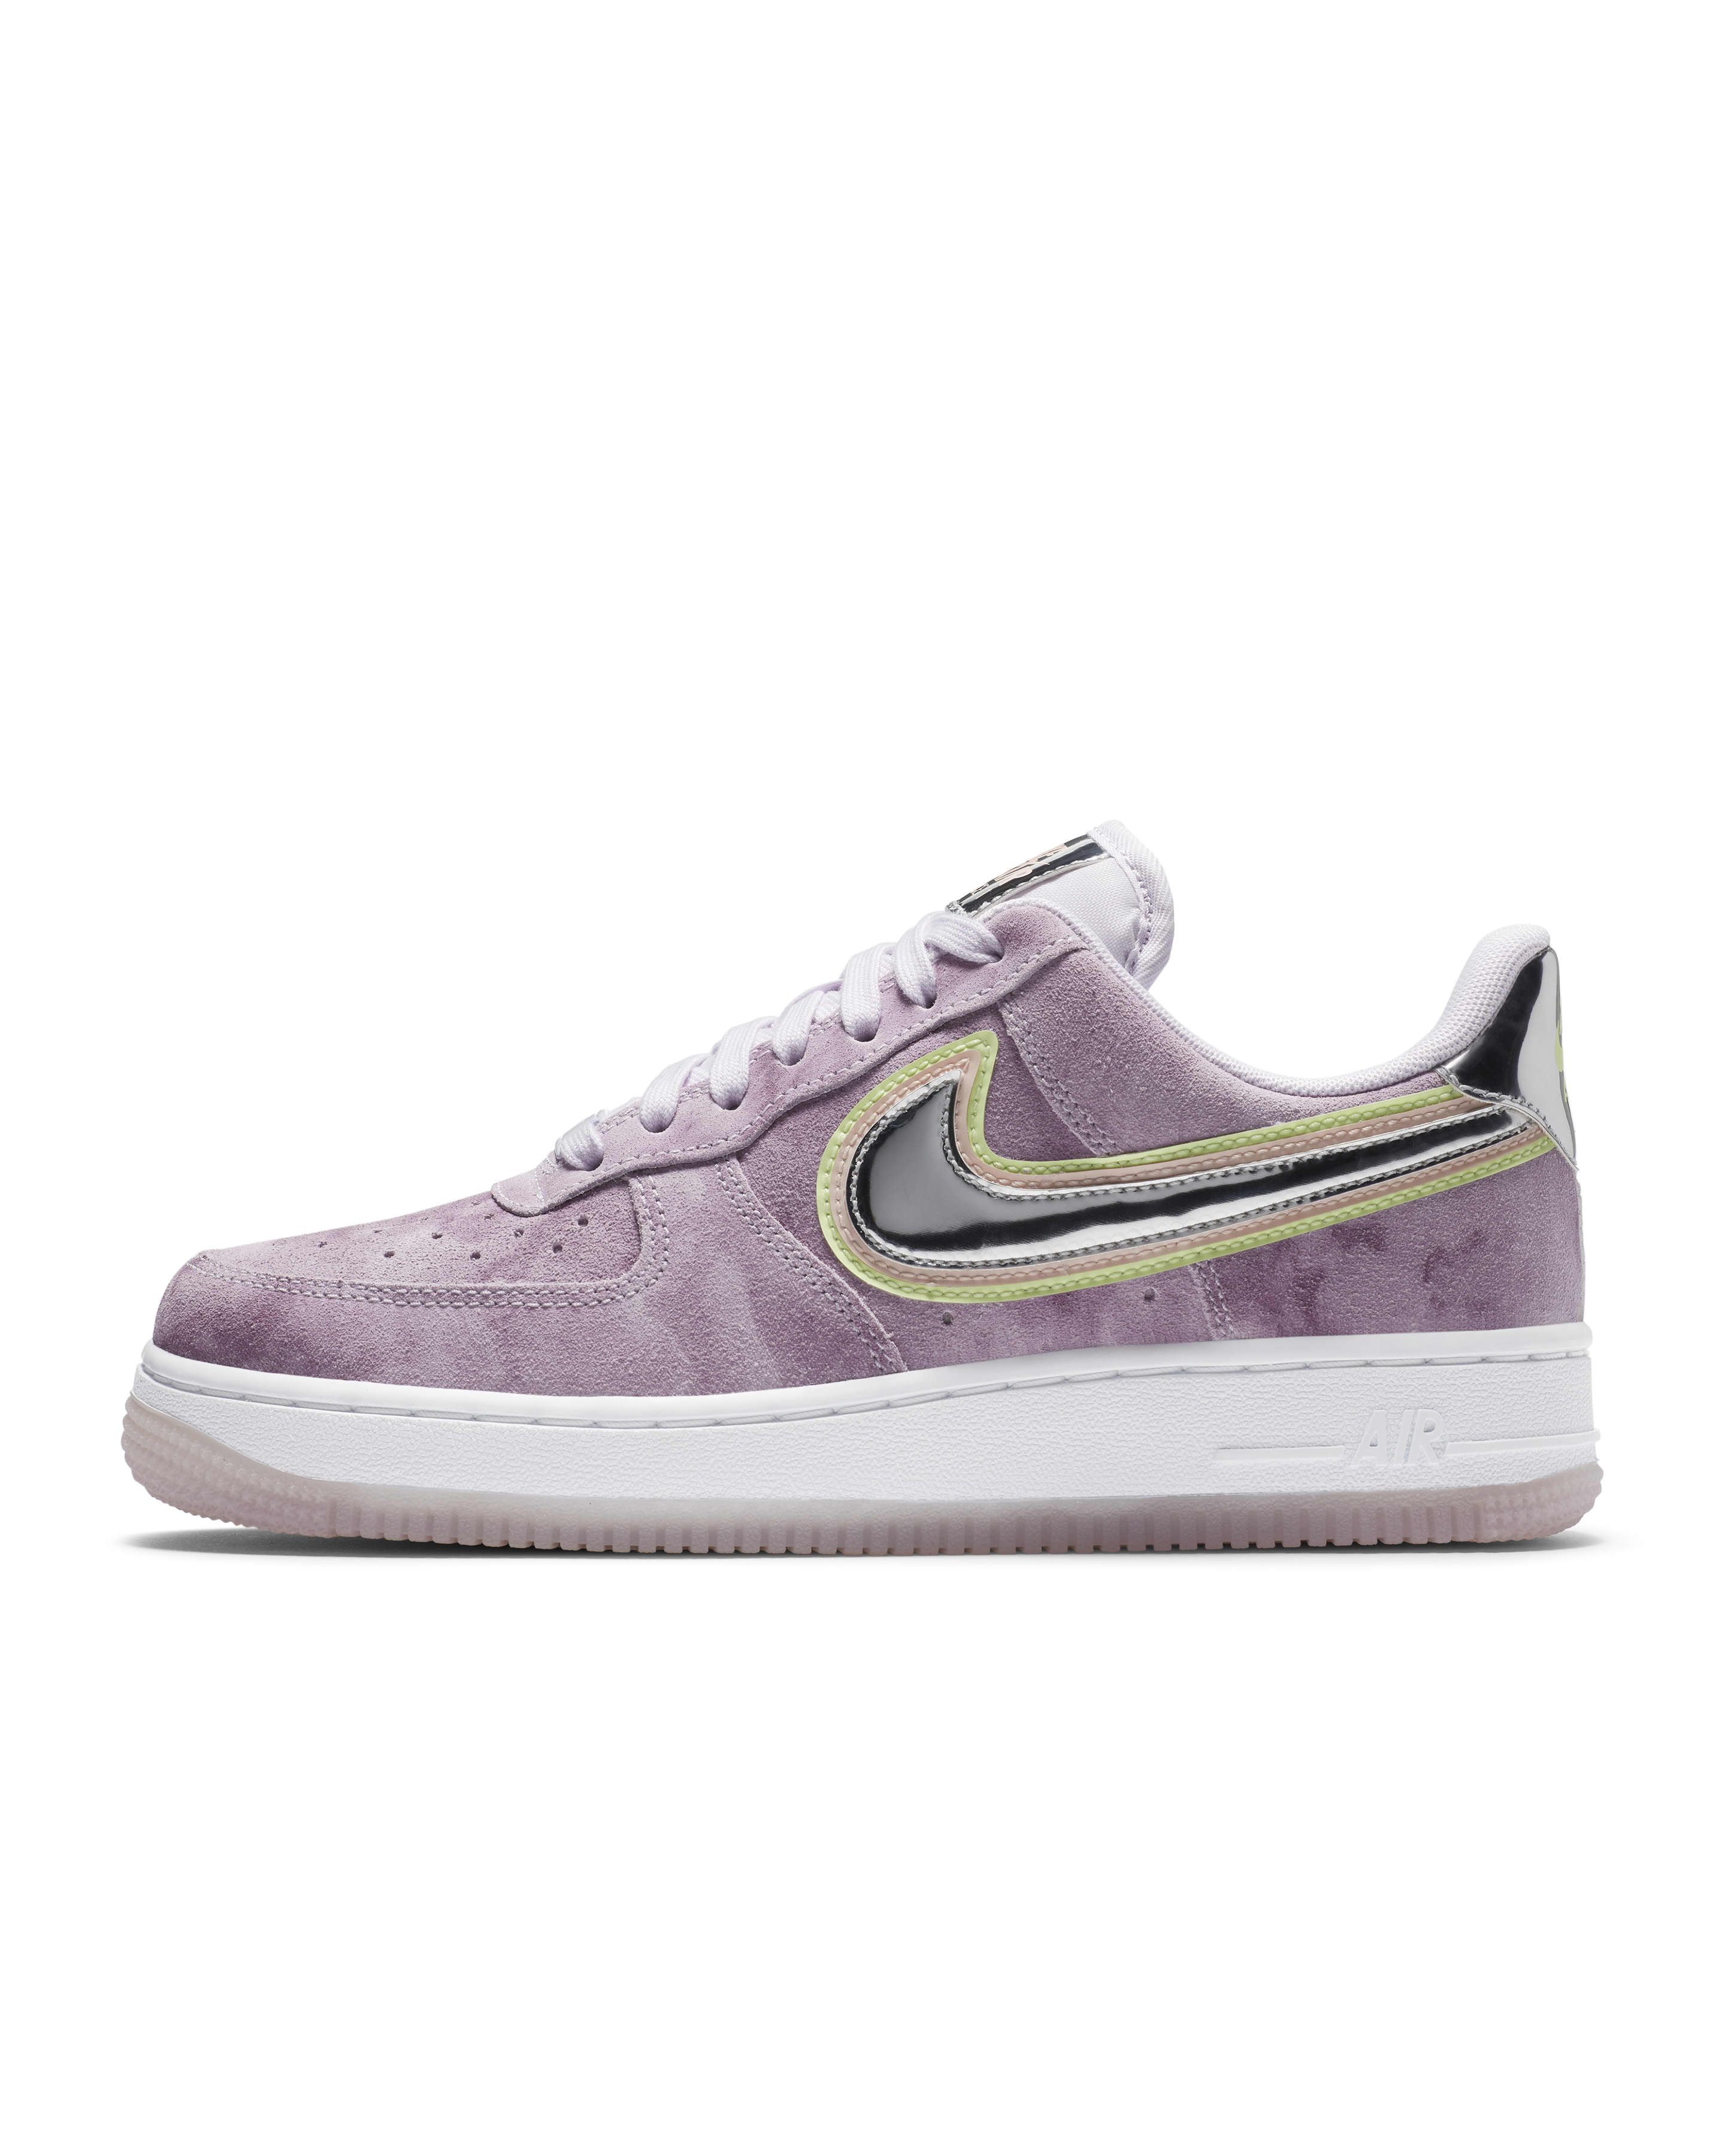 The Best Nike Air Force 1 Sneakers to 